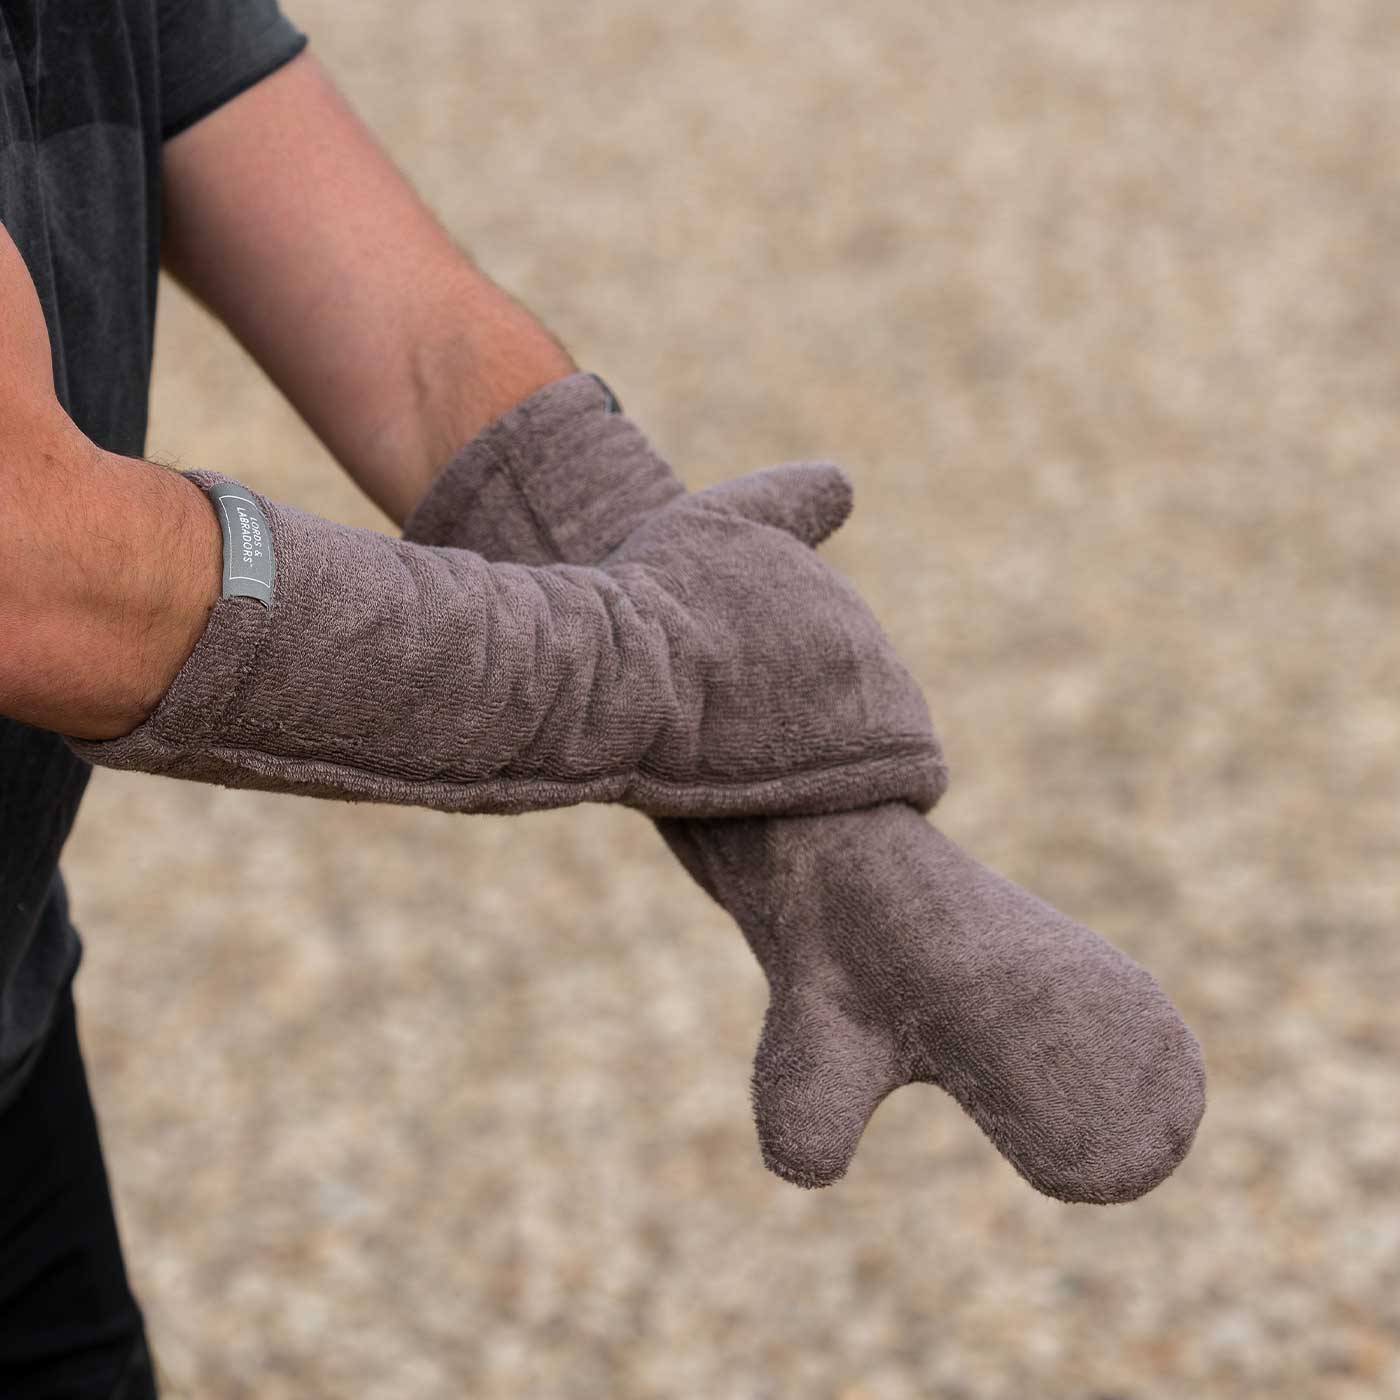 Introducing the ultimate bamboo dog drying mitts in beautiful Mole (Brown), made from luxurious bamboo to aid sensitive skin featuring universal size to fit all with super absorbent material for easy pet drying! The perfect dog drying gloves, available now at Lords & Labradors US, In four colors!